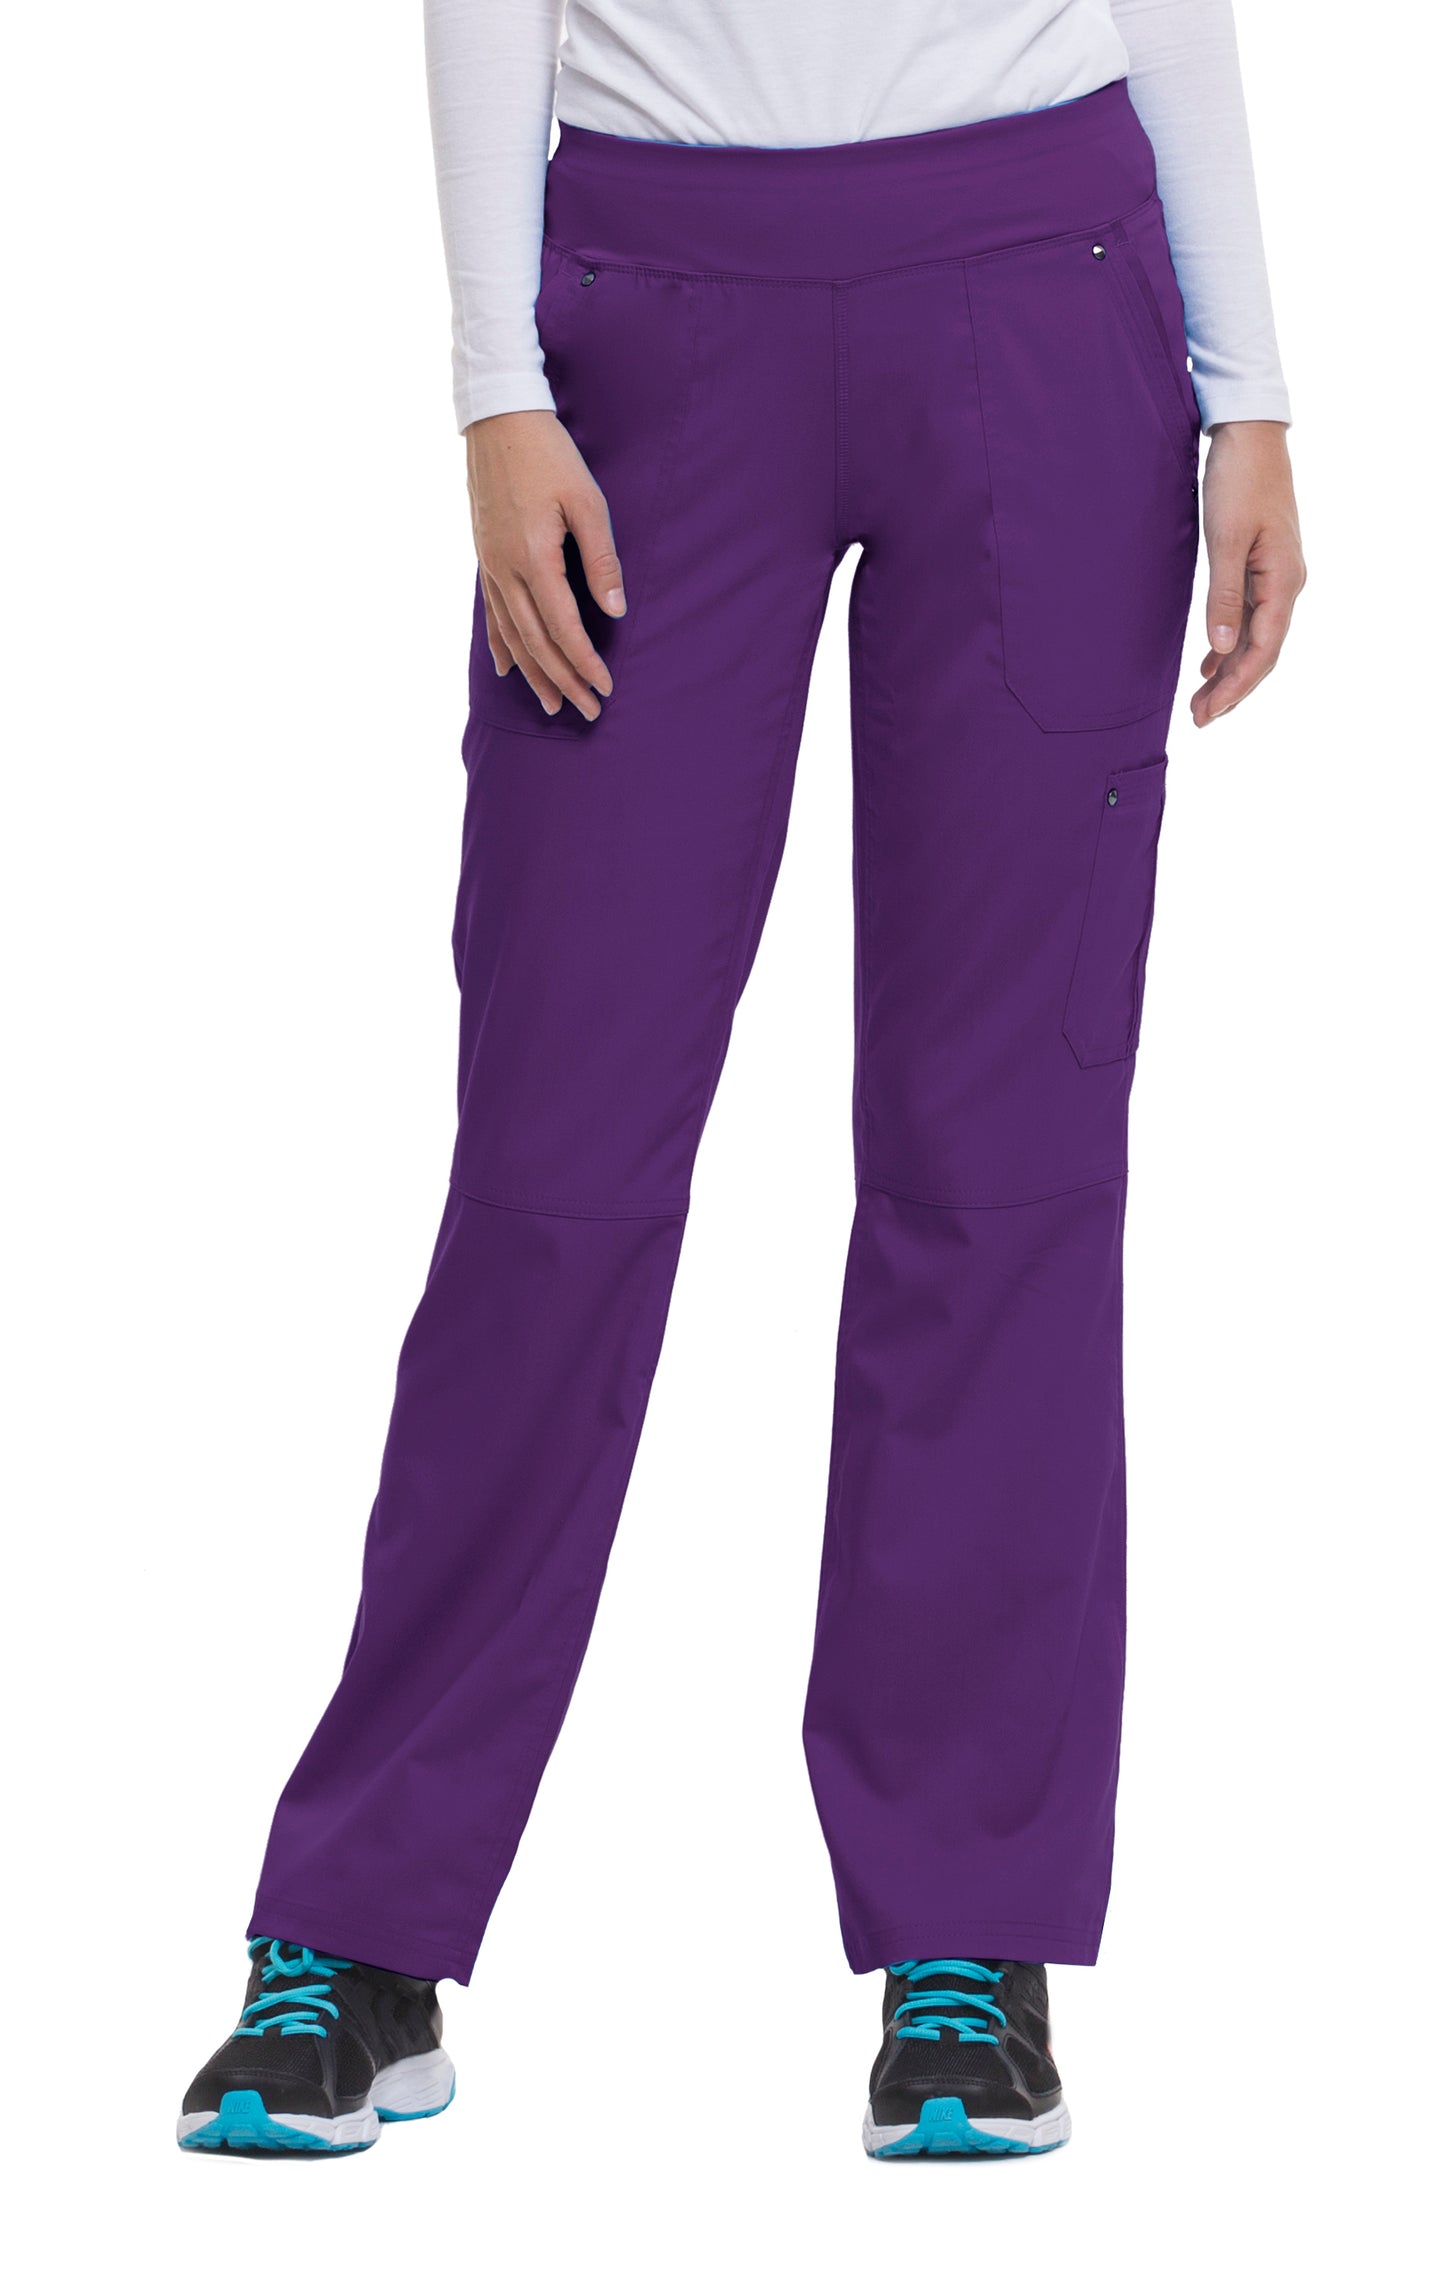 Healing Hands Tall Scrub Pant Purple Label Tori Yoga in Eggplant at Parker's Clothing and Shoes.